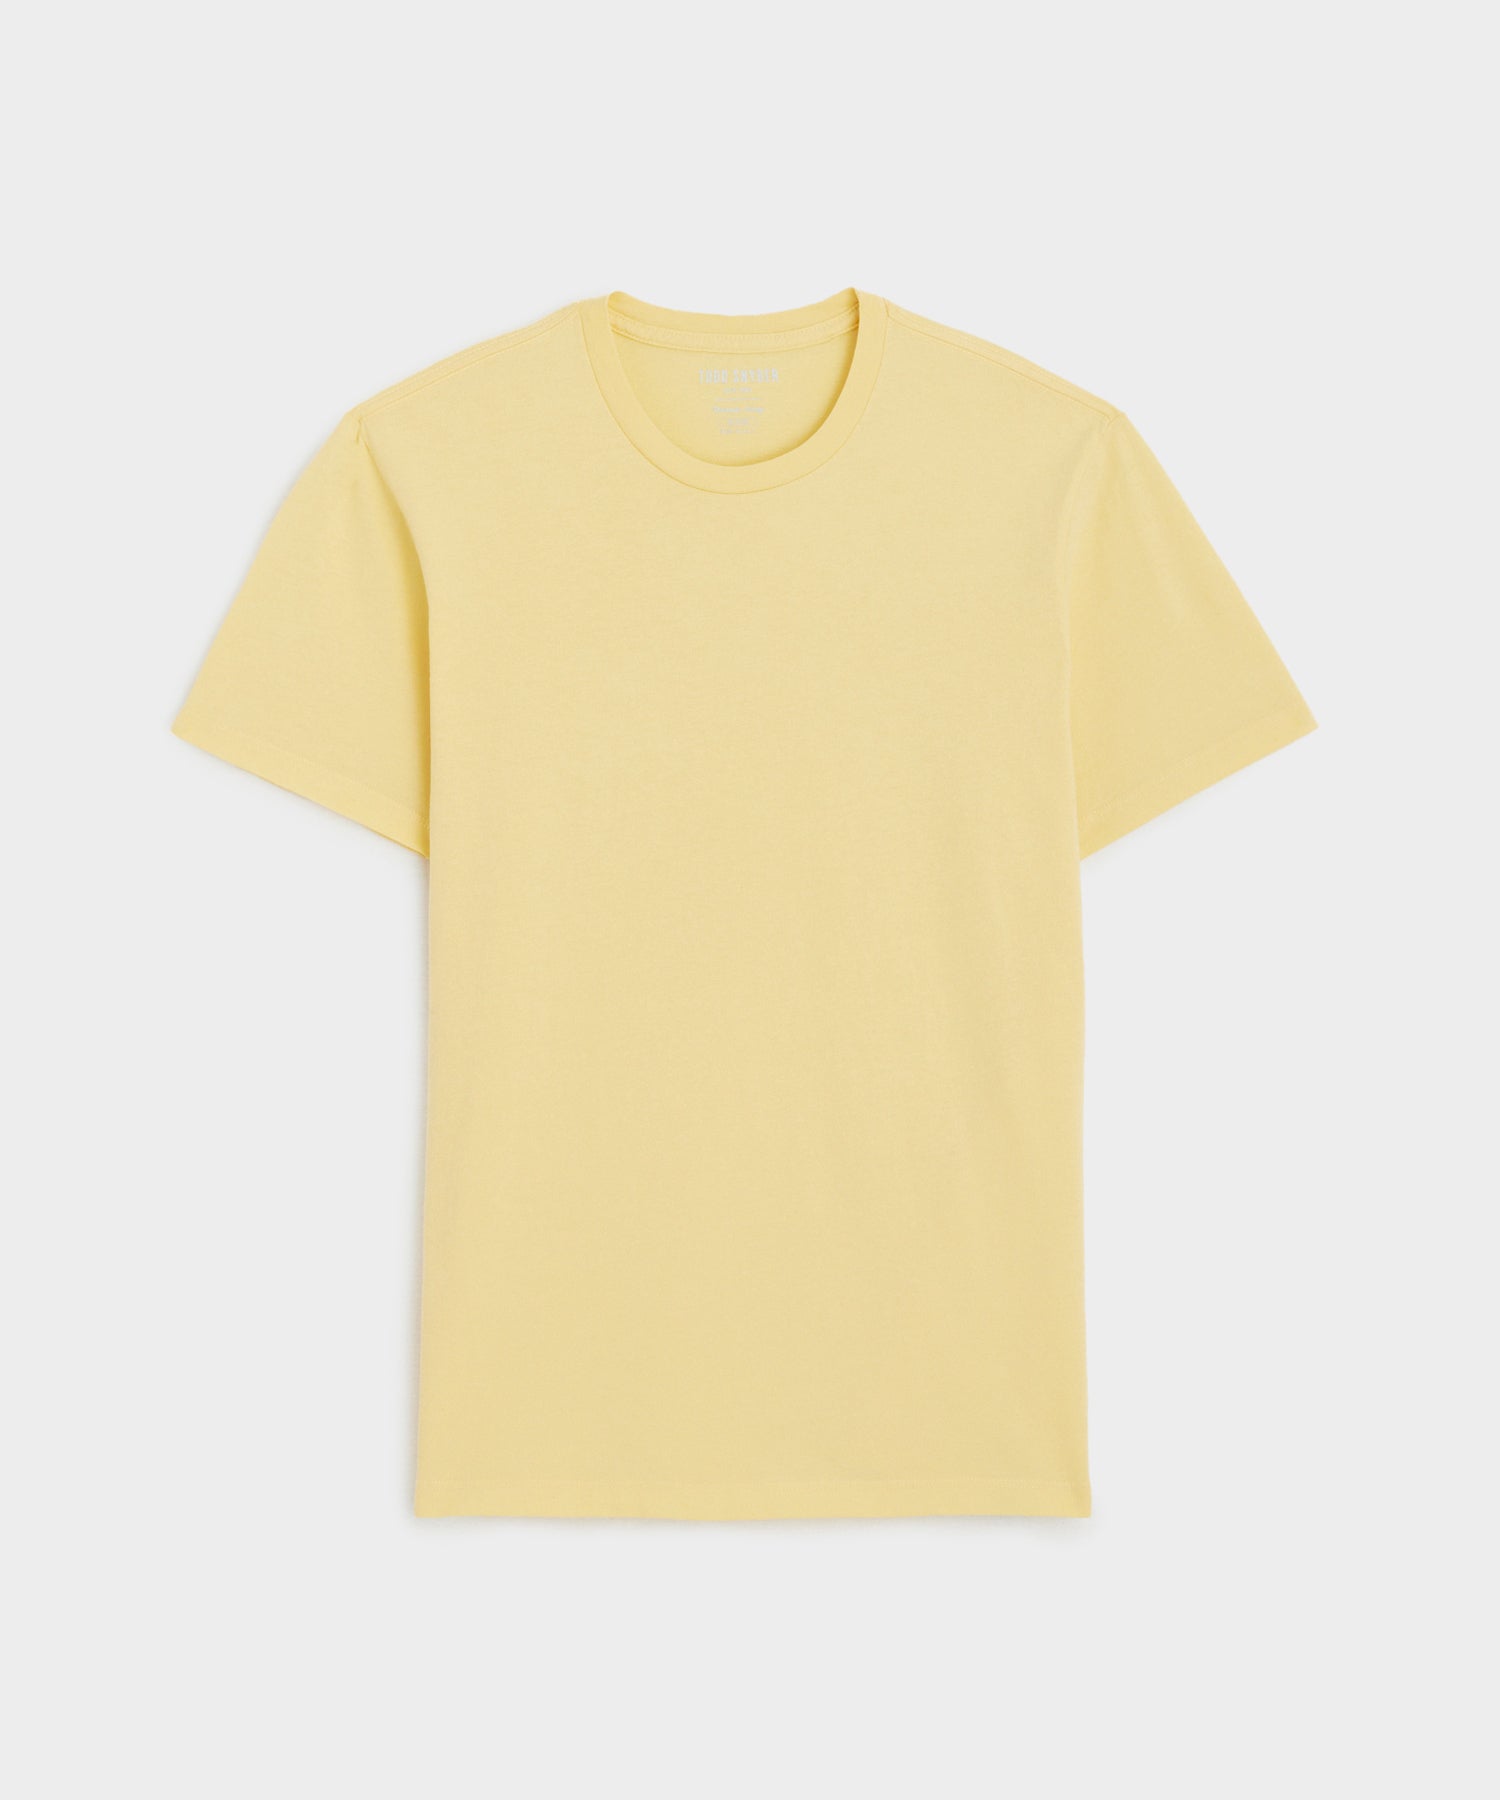 Made In L.A. Premium Jersey T-Shirt in Lemon